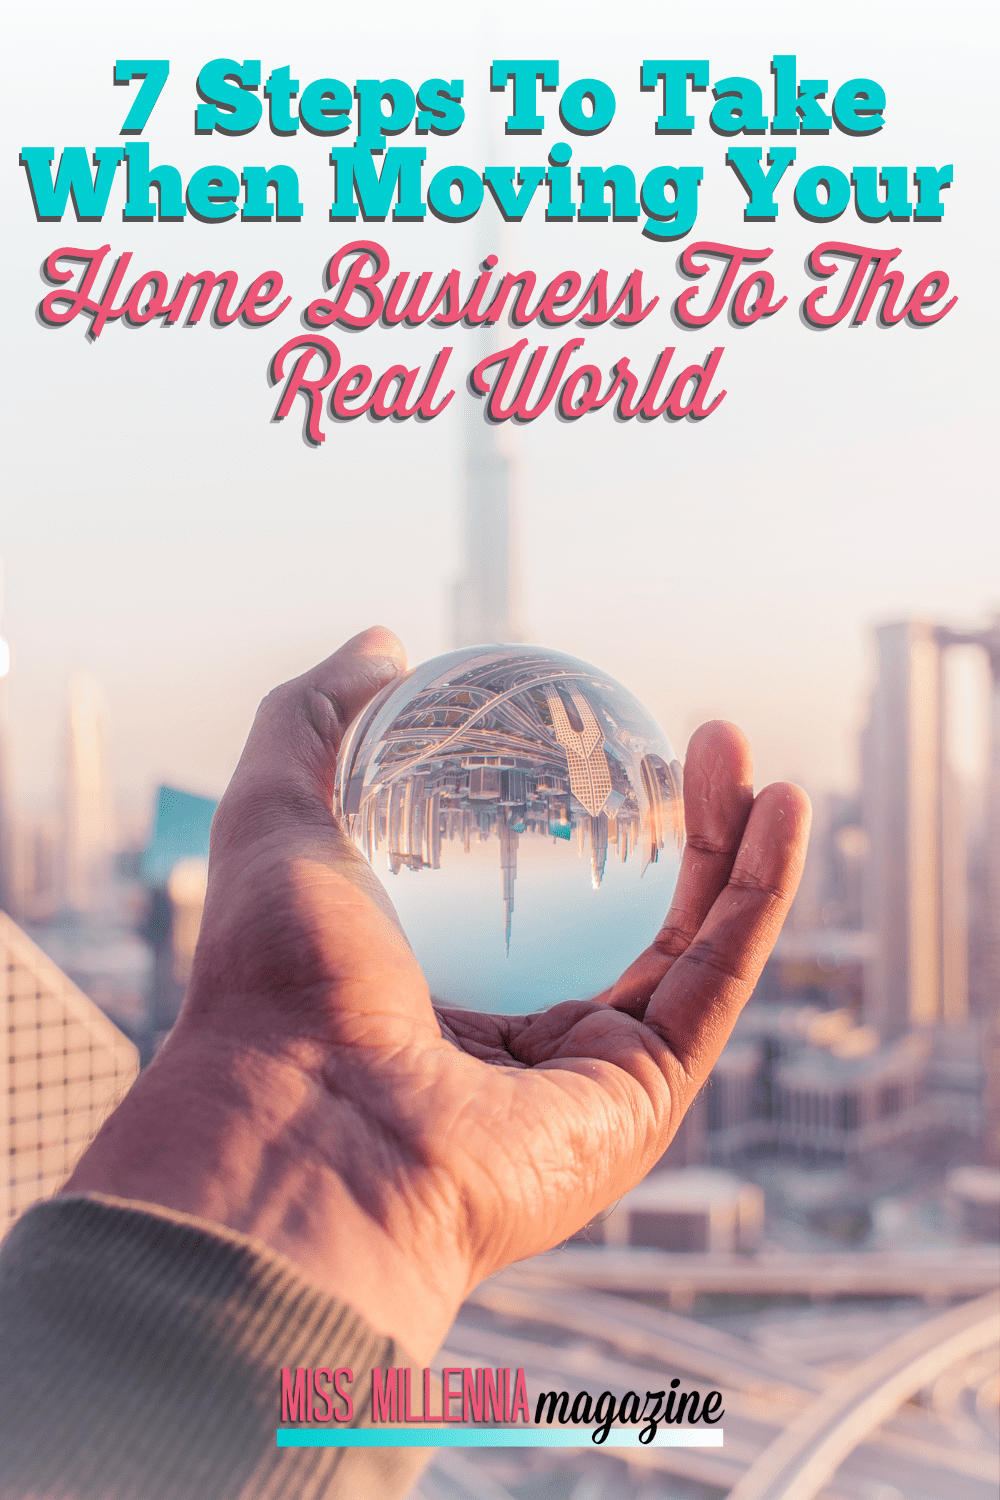 7 Steps To Take When Moving Your Home Business To The Real World